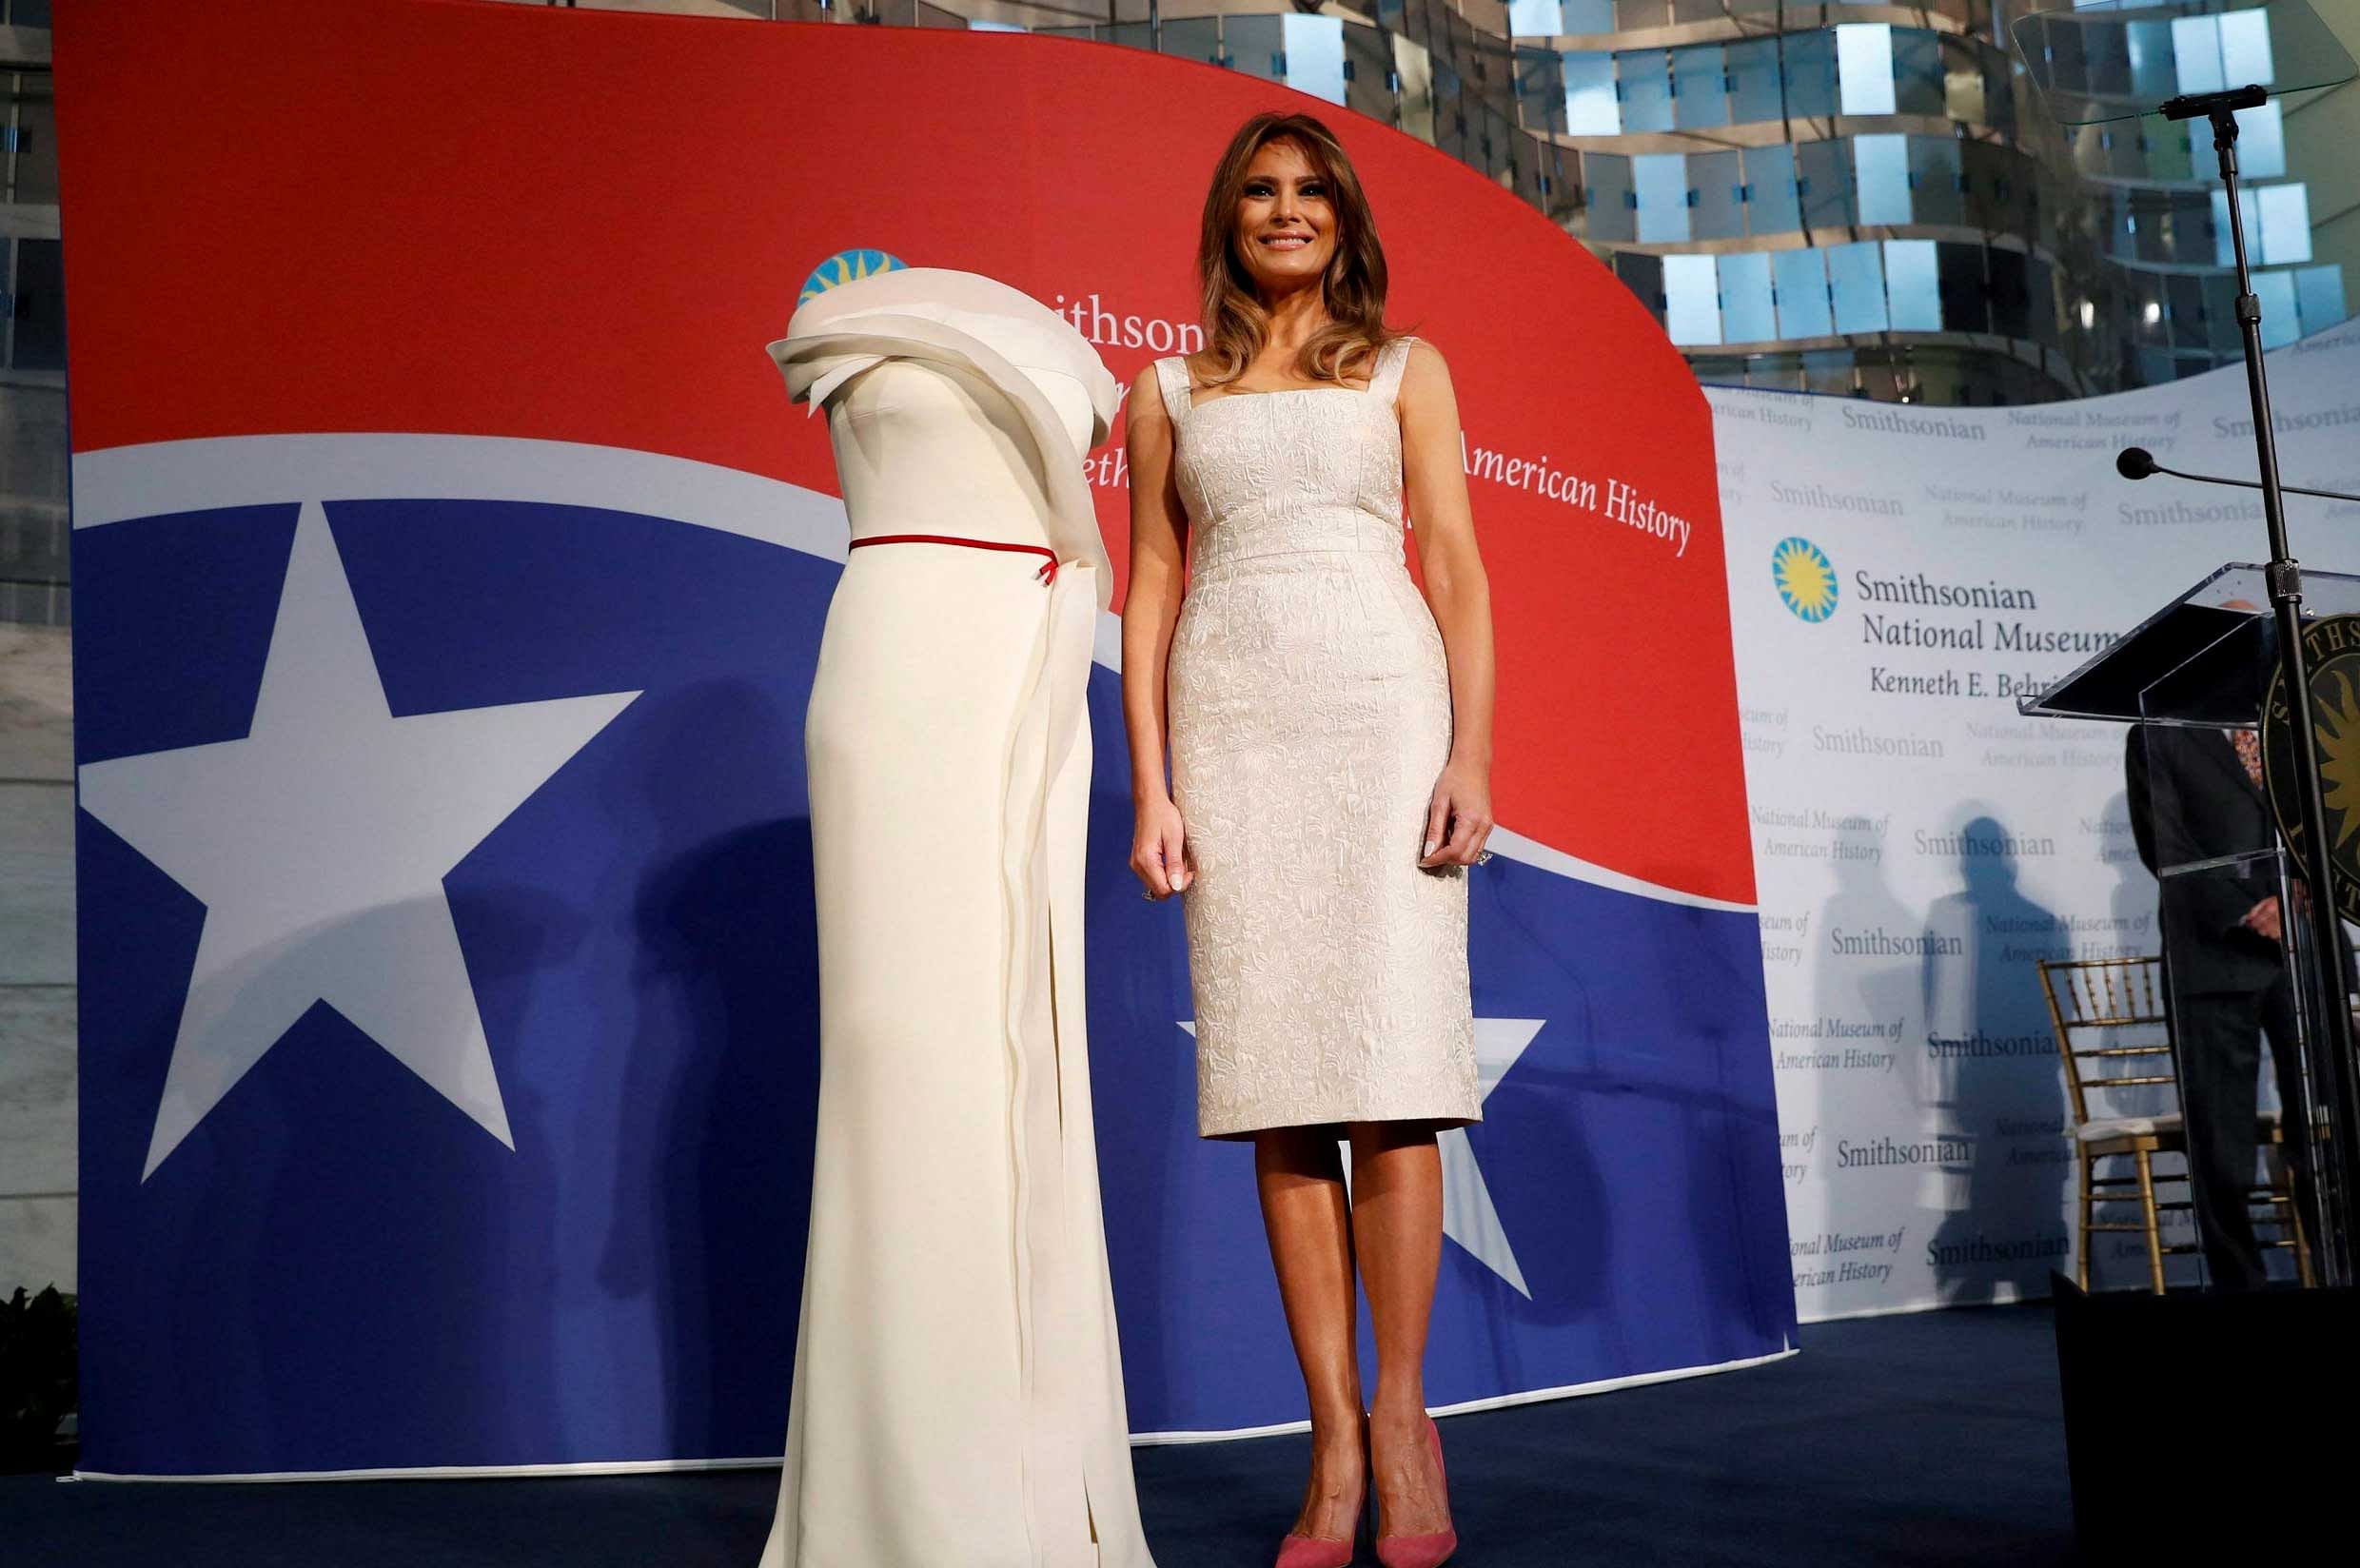 First lady Melania Trump donates her inaugural gown, designed by Herve Pierre, to the First Ladies' Collection at the Smithsonian's National Museum of American History, during a ceremony in Washington, Friday, Oct. 20, 2017. AP/ PTI